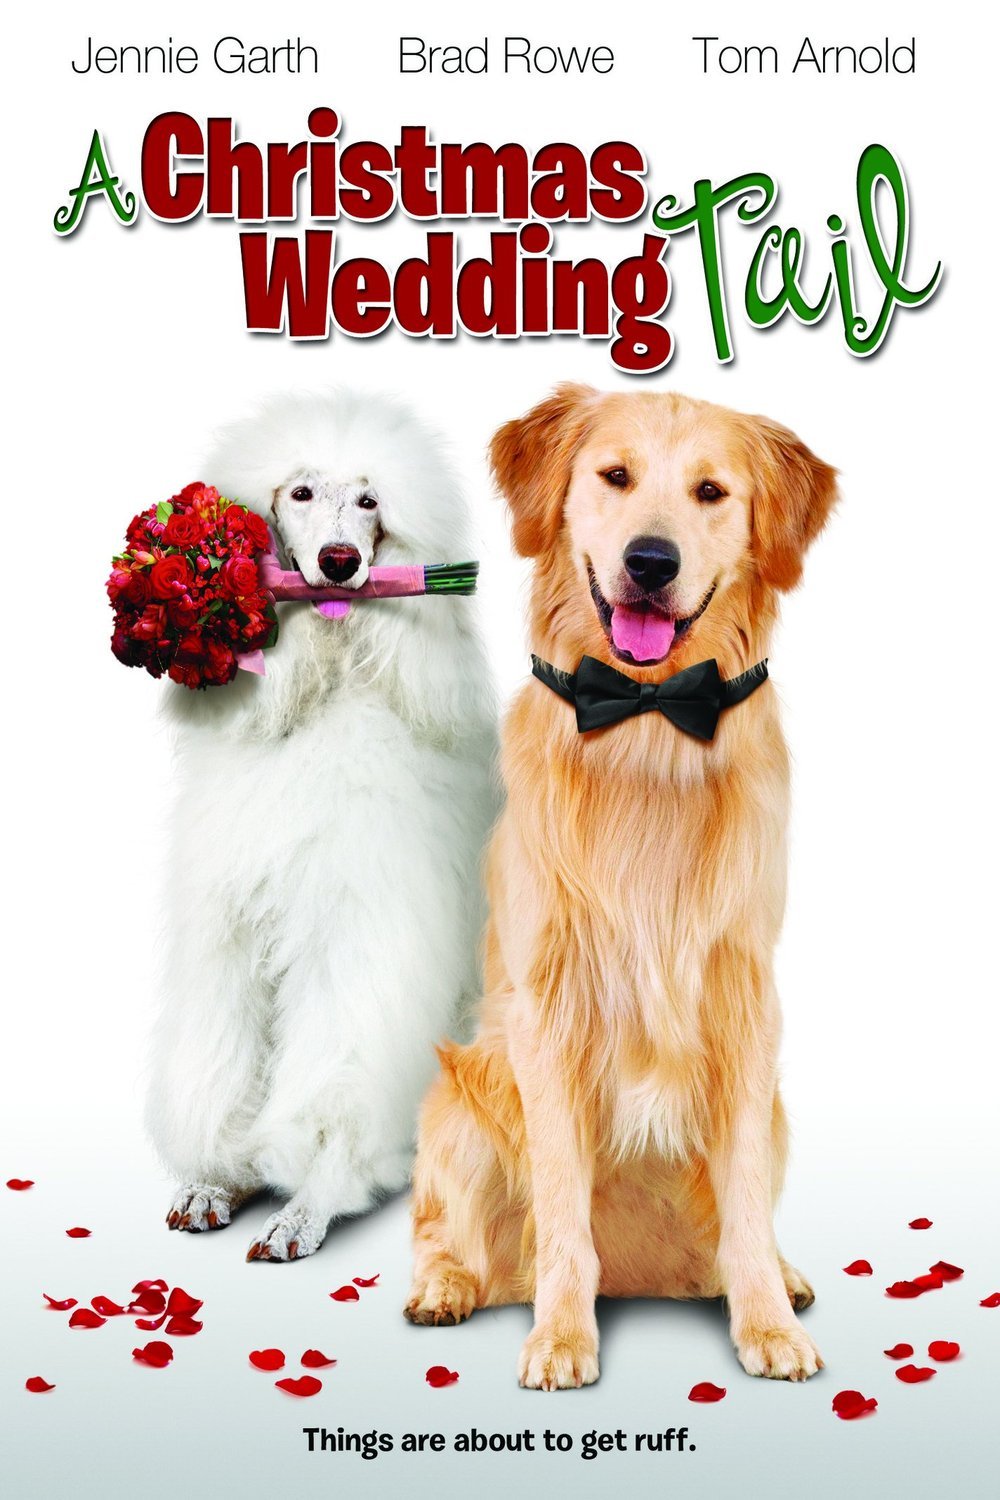 Poster of the movie A Christmas Wedding Tail